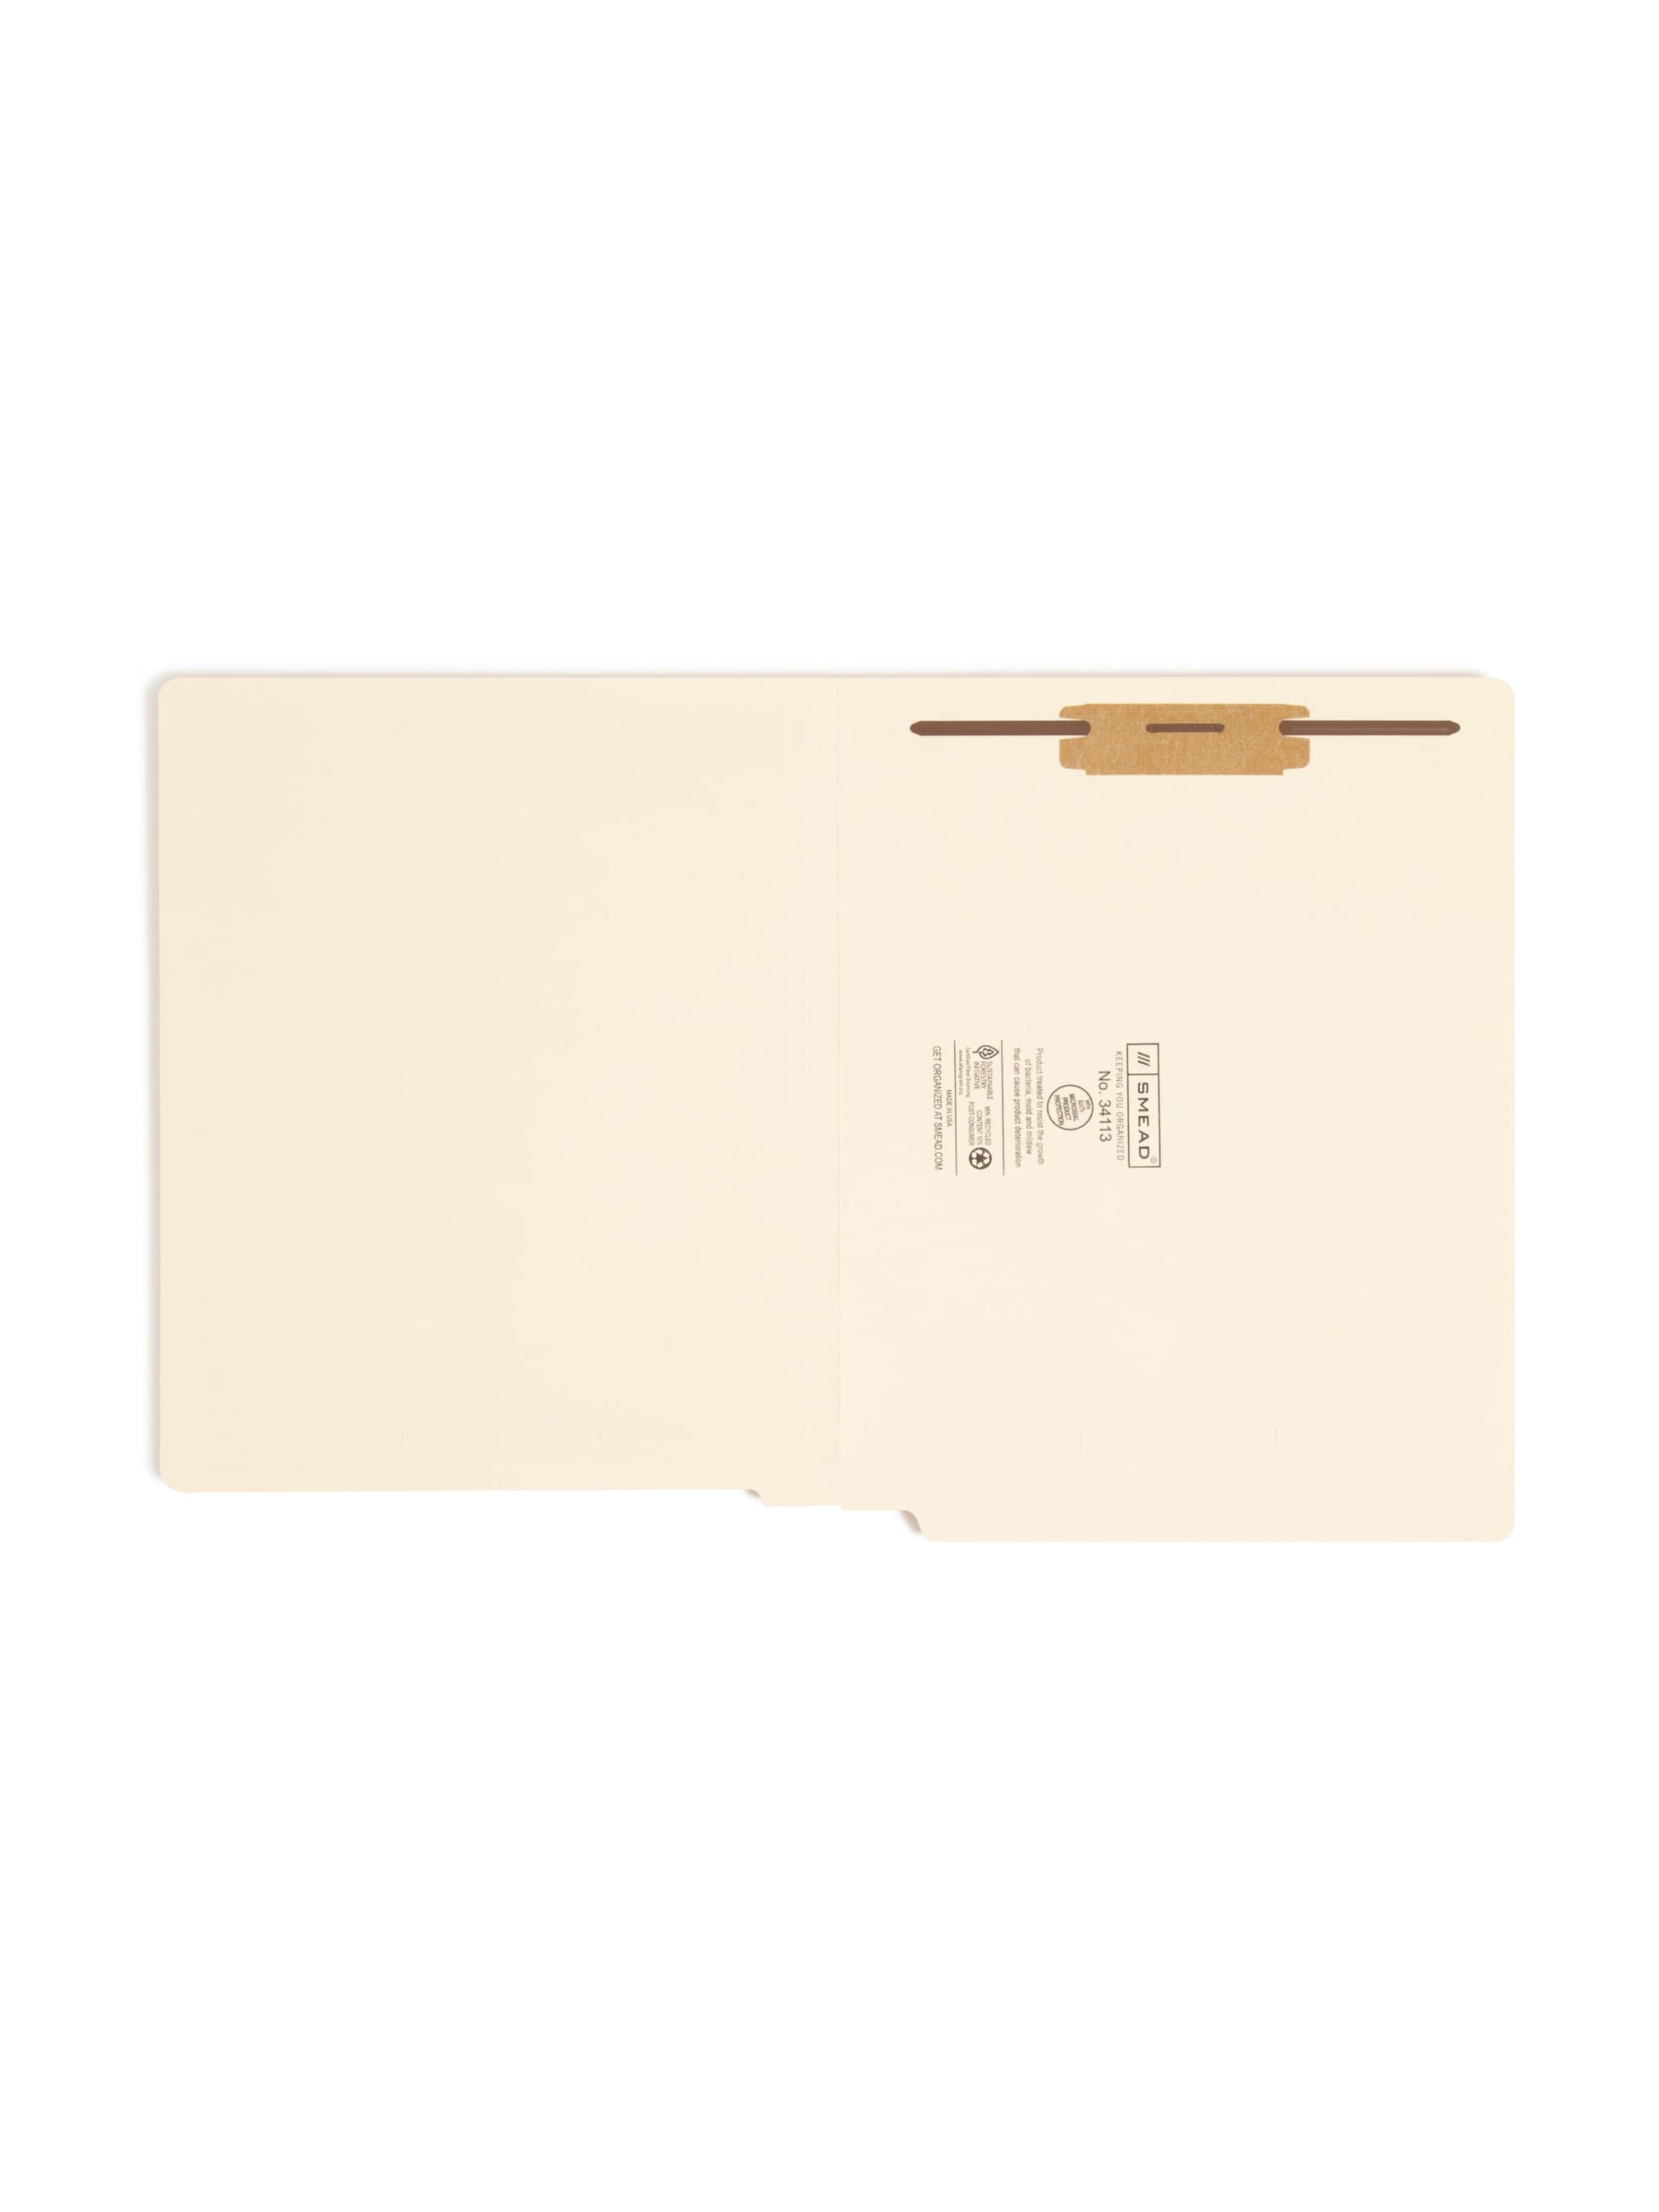 Shelf-Master® Reinforced End Tab Fastener File Folders with Antimicrobial Product Protection, Straight-Cut Tab, 1 Fastener, Manila Color, Letter Size, Set of 50, 086486341134